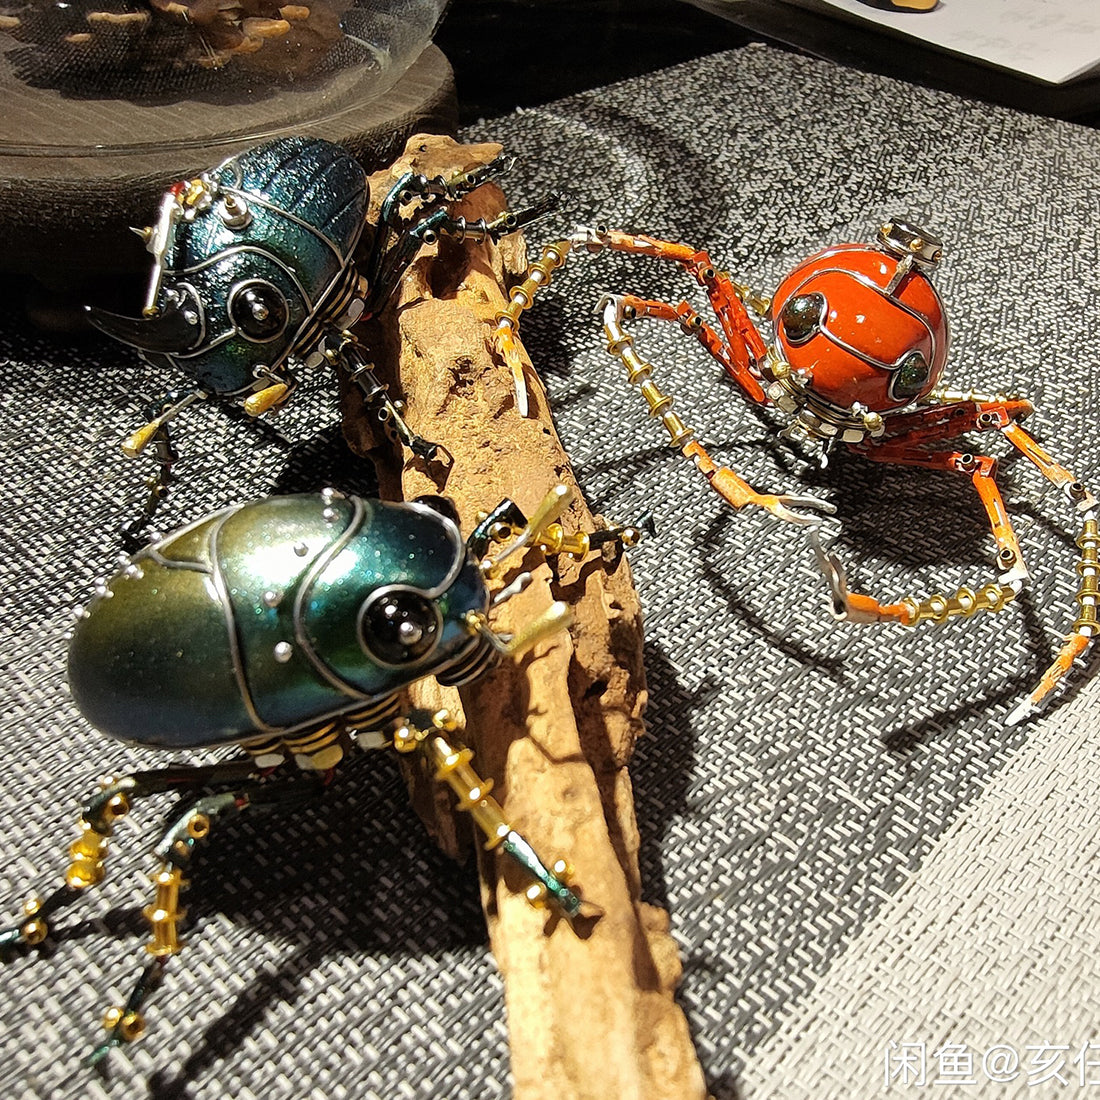 Steampunk Red Little Six-Legs Beetle 3D Metal Bug Insect Model Handmade Assembled Crafts